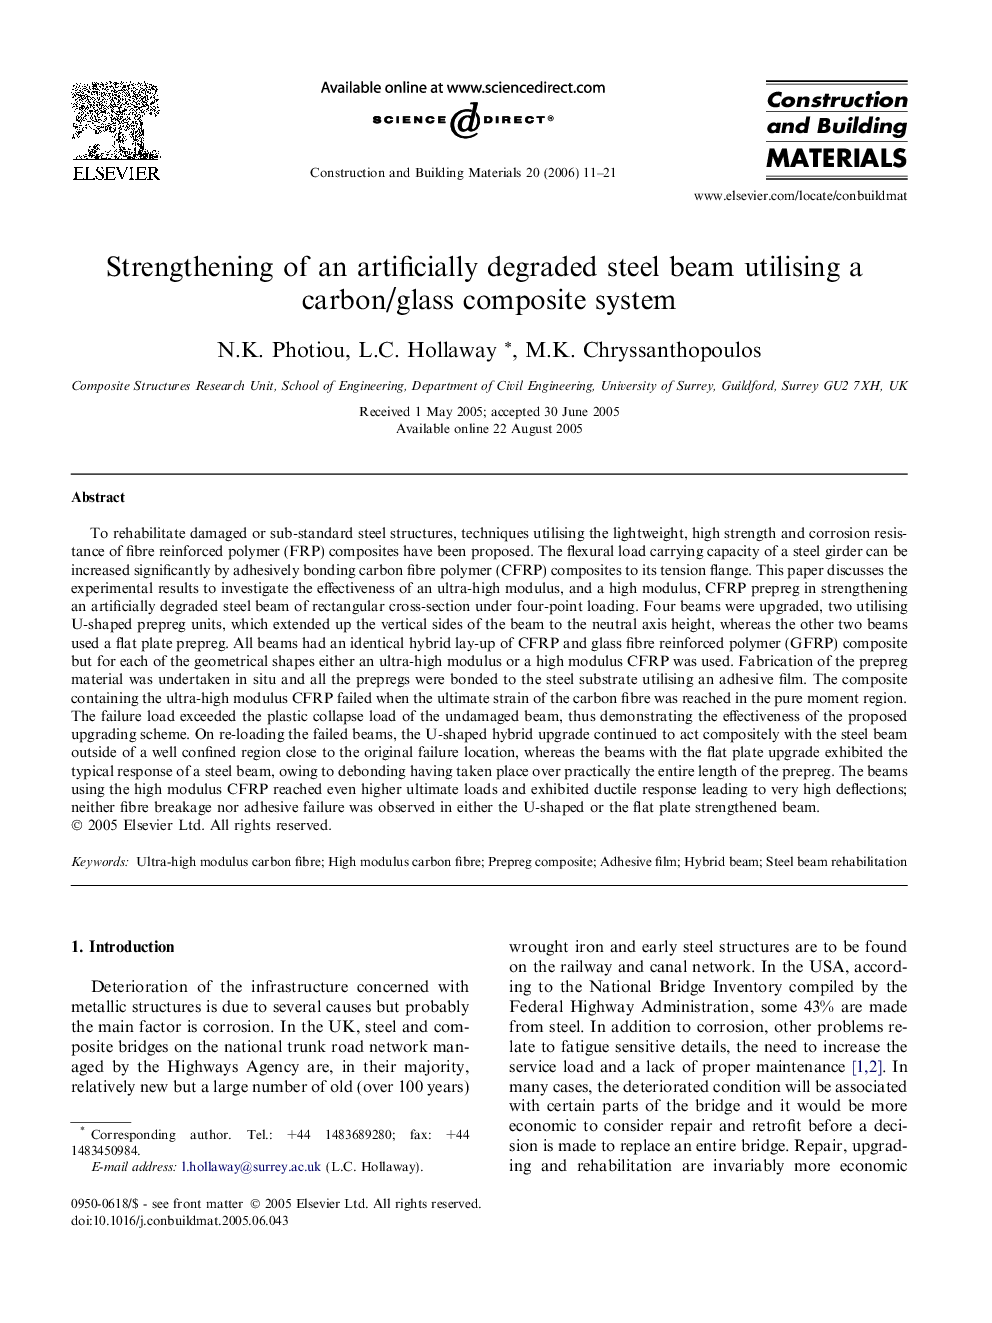 Strengthening of an artificially degraded steel beam utilising a carbon/glass composite system